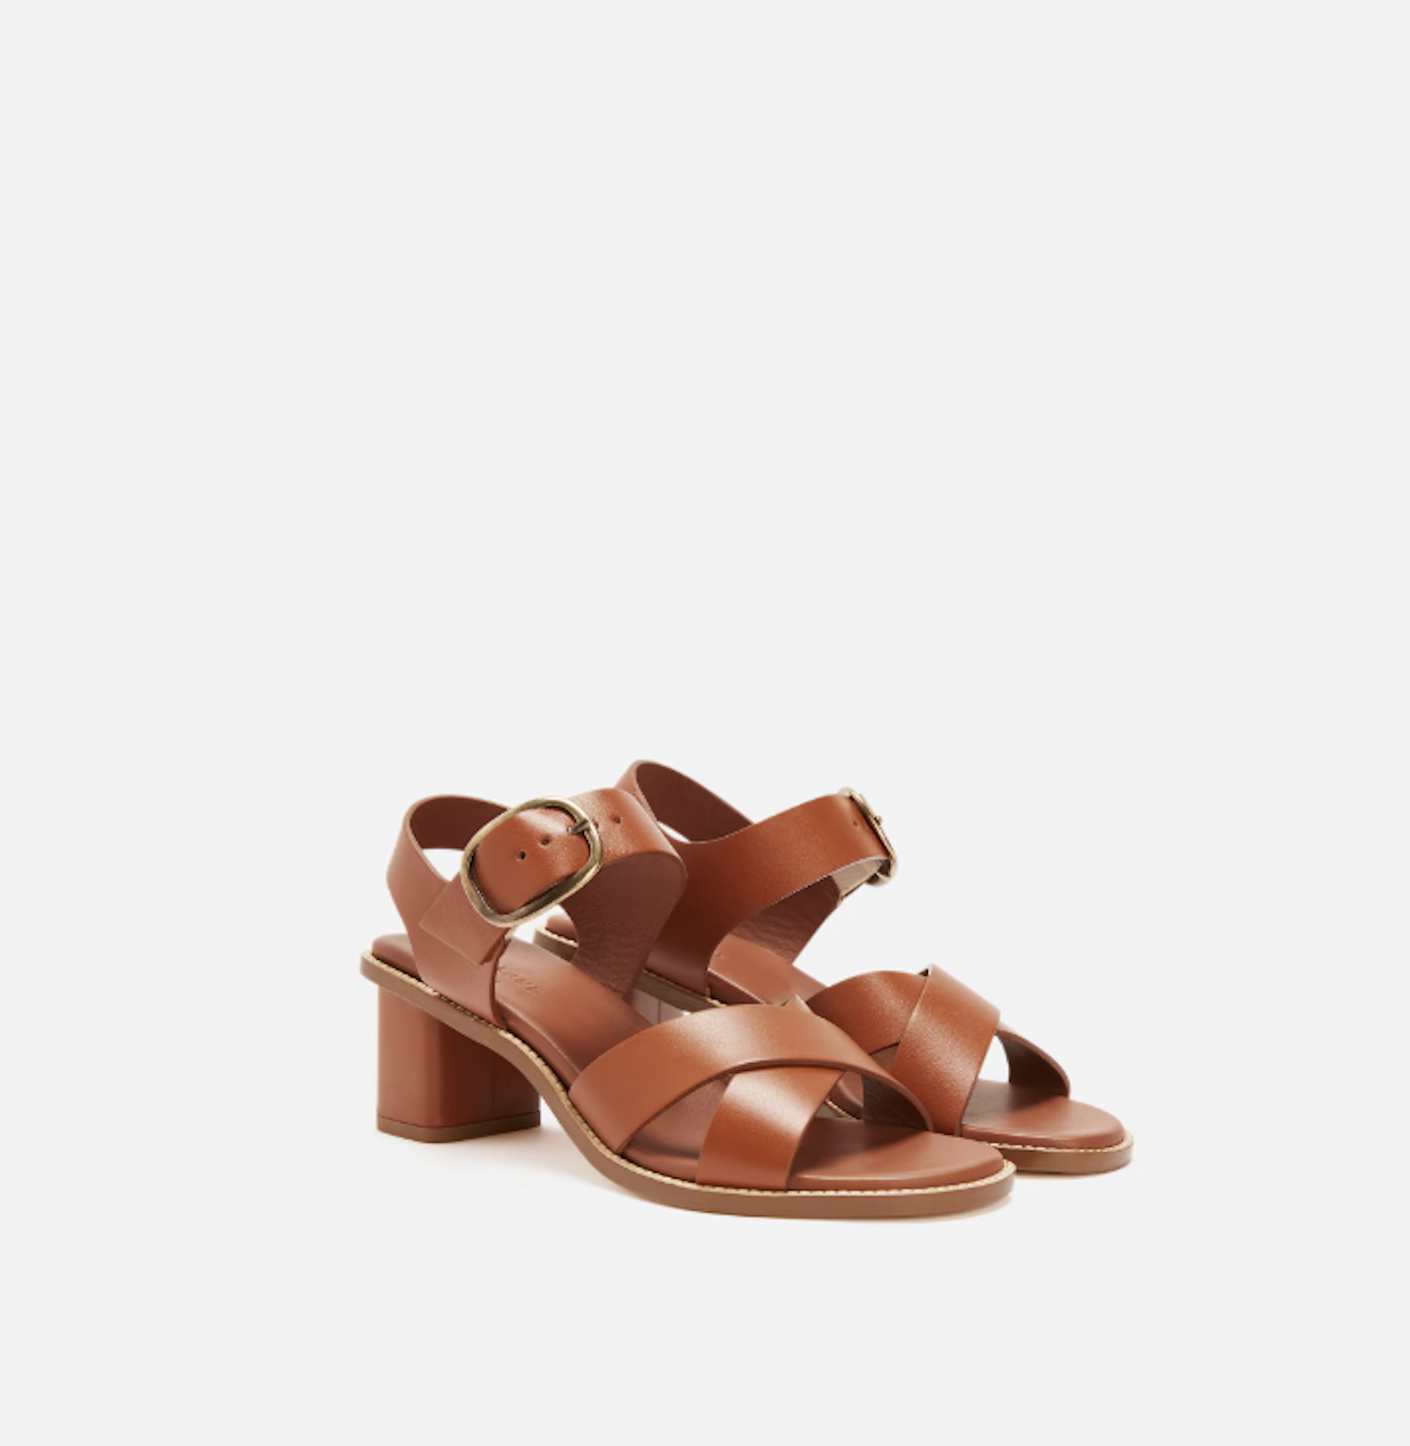 A strappy pair of chesnut brown heeled shoes are pictured in front of a white background.